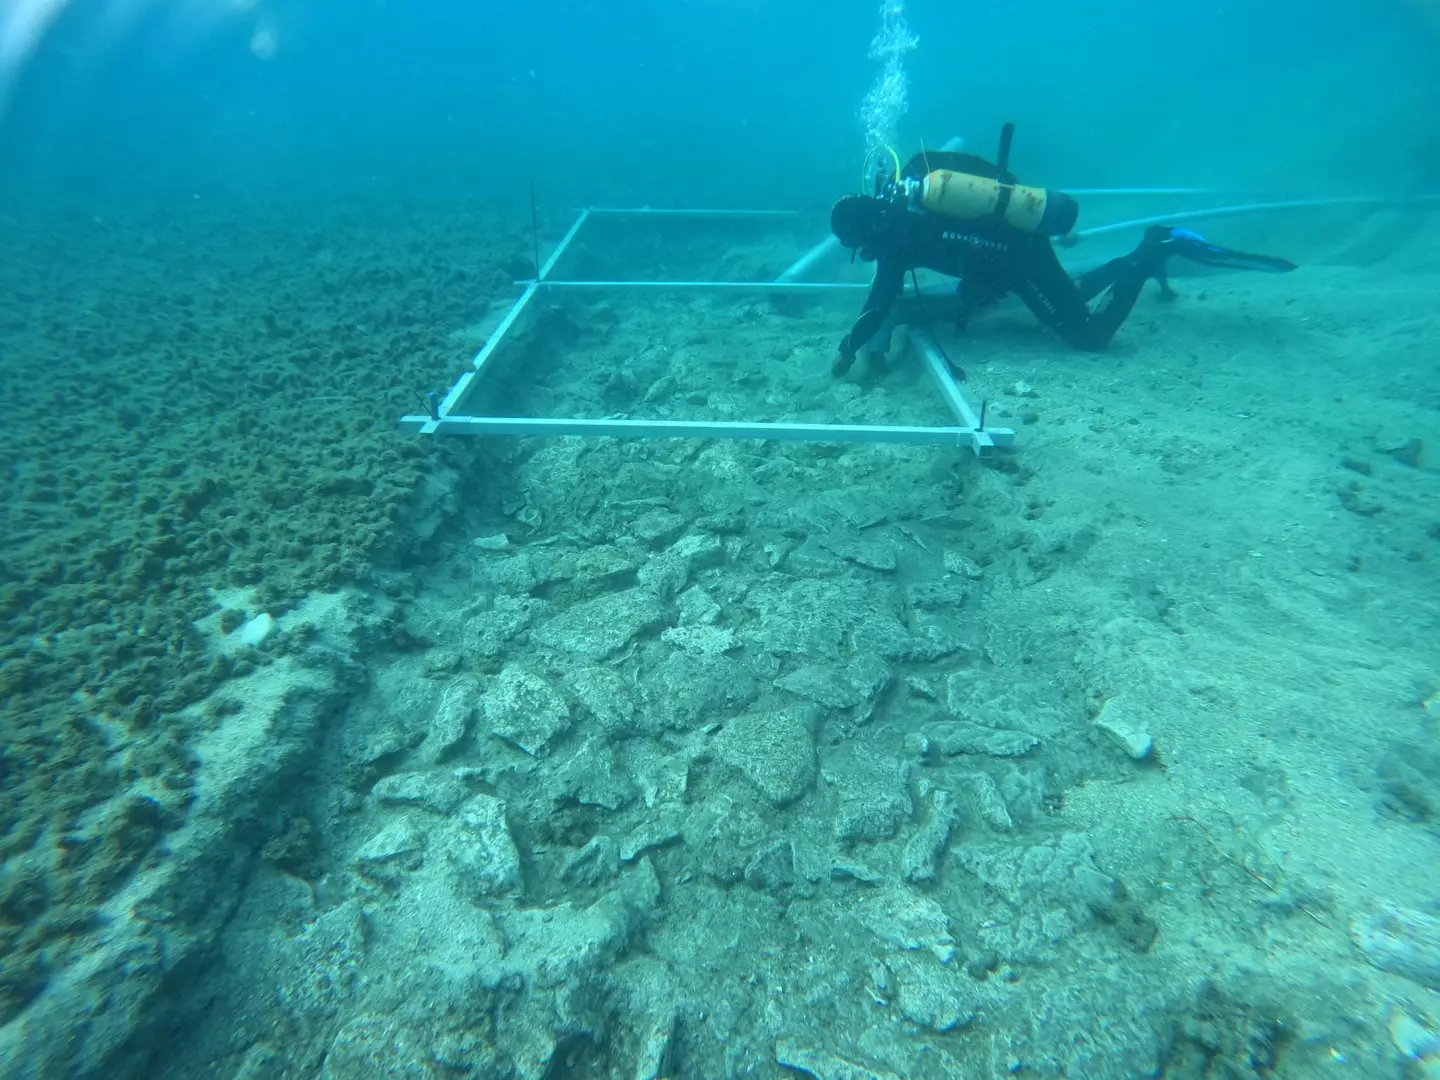 Archaeologists have found a prehistoric highway at the bottom of the Adriatic Sea.